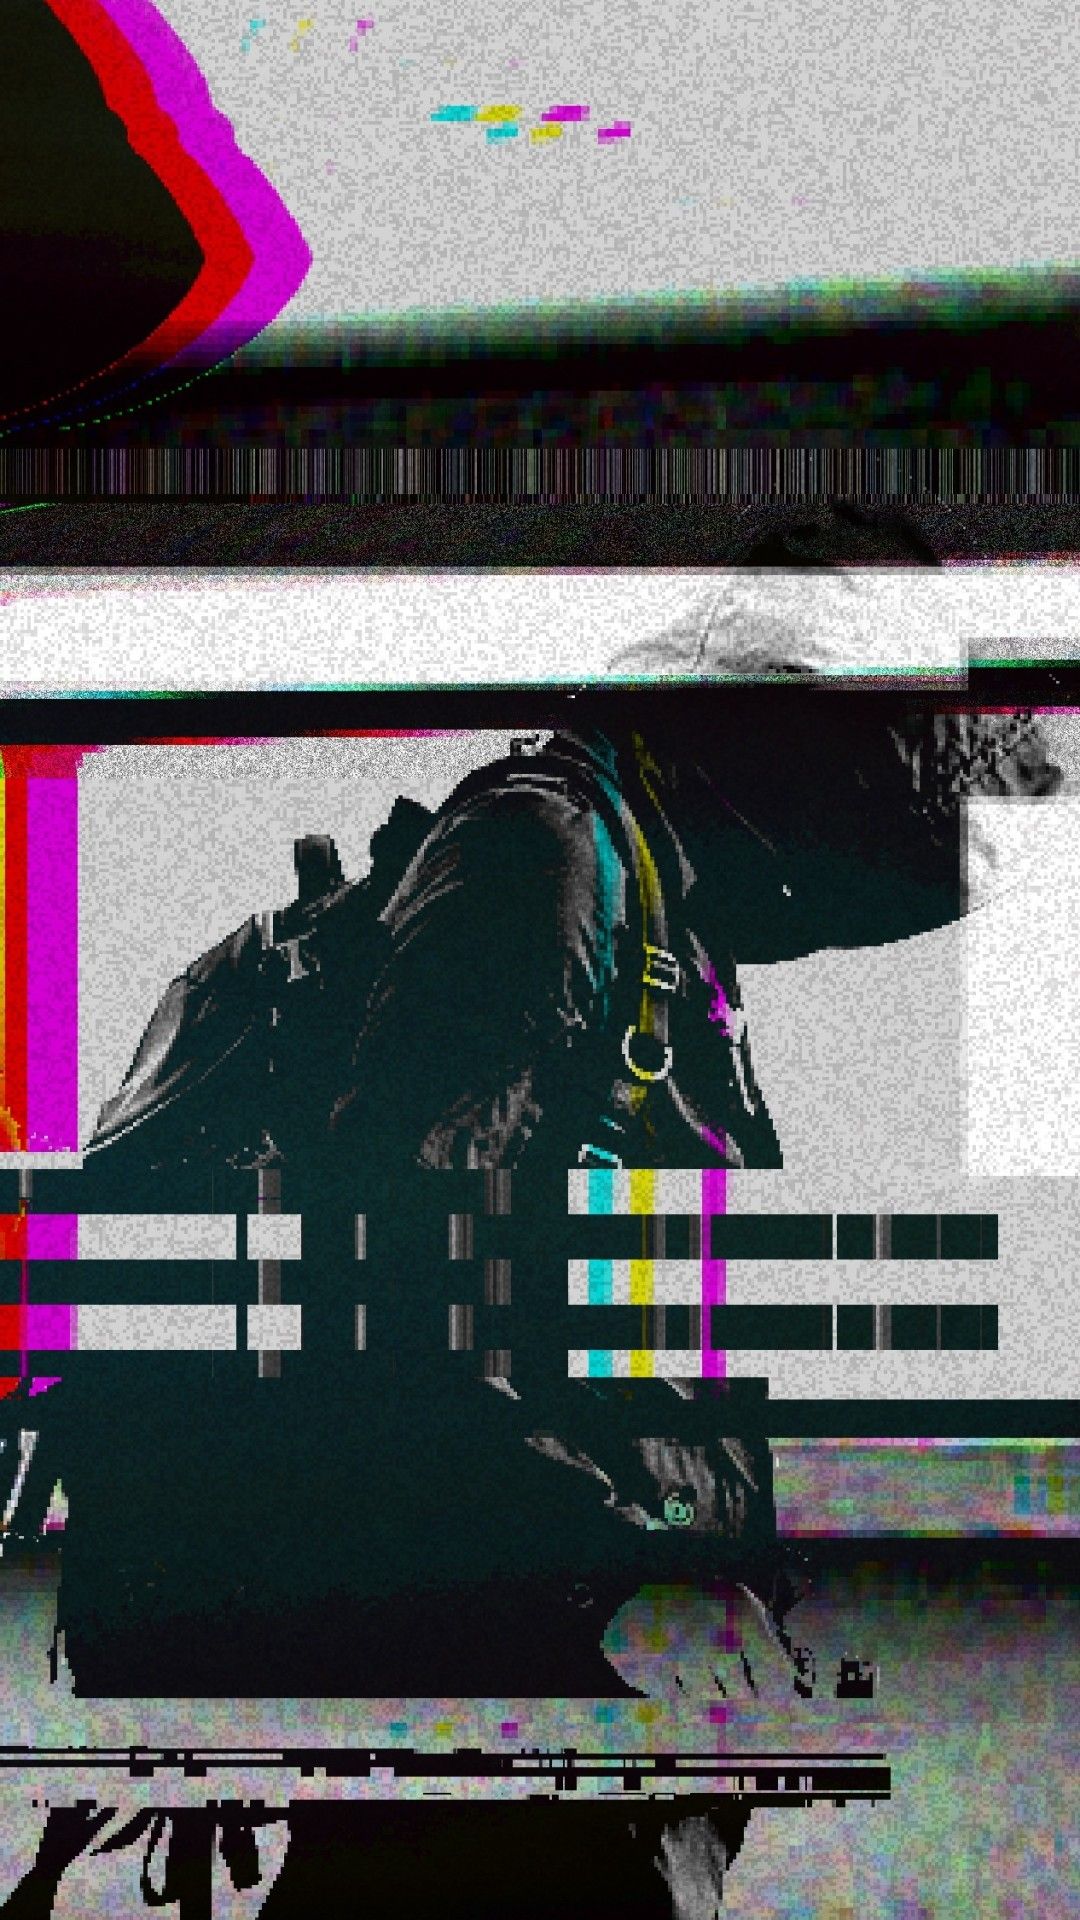 Glitch art of a person with a backpack - Vaporwave, glitch